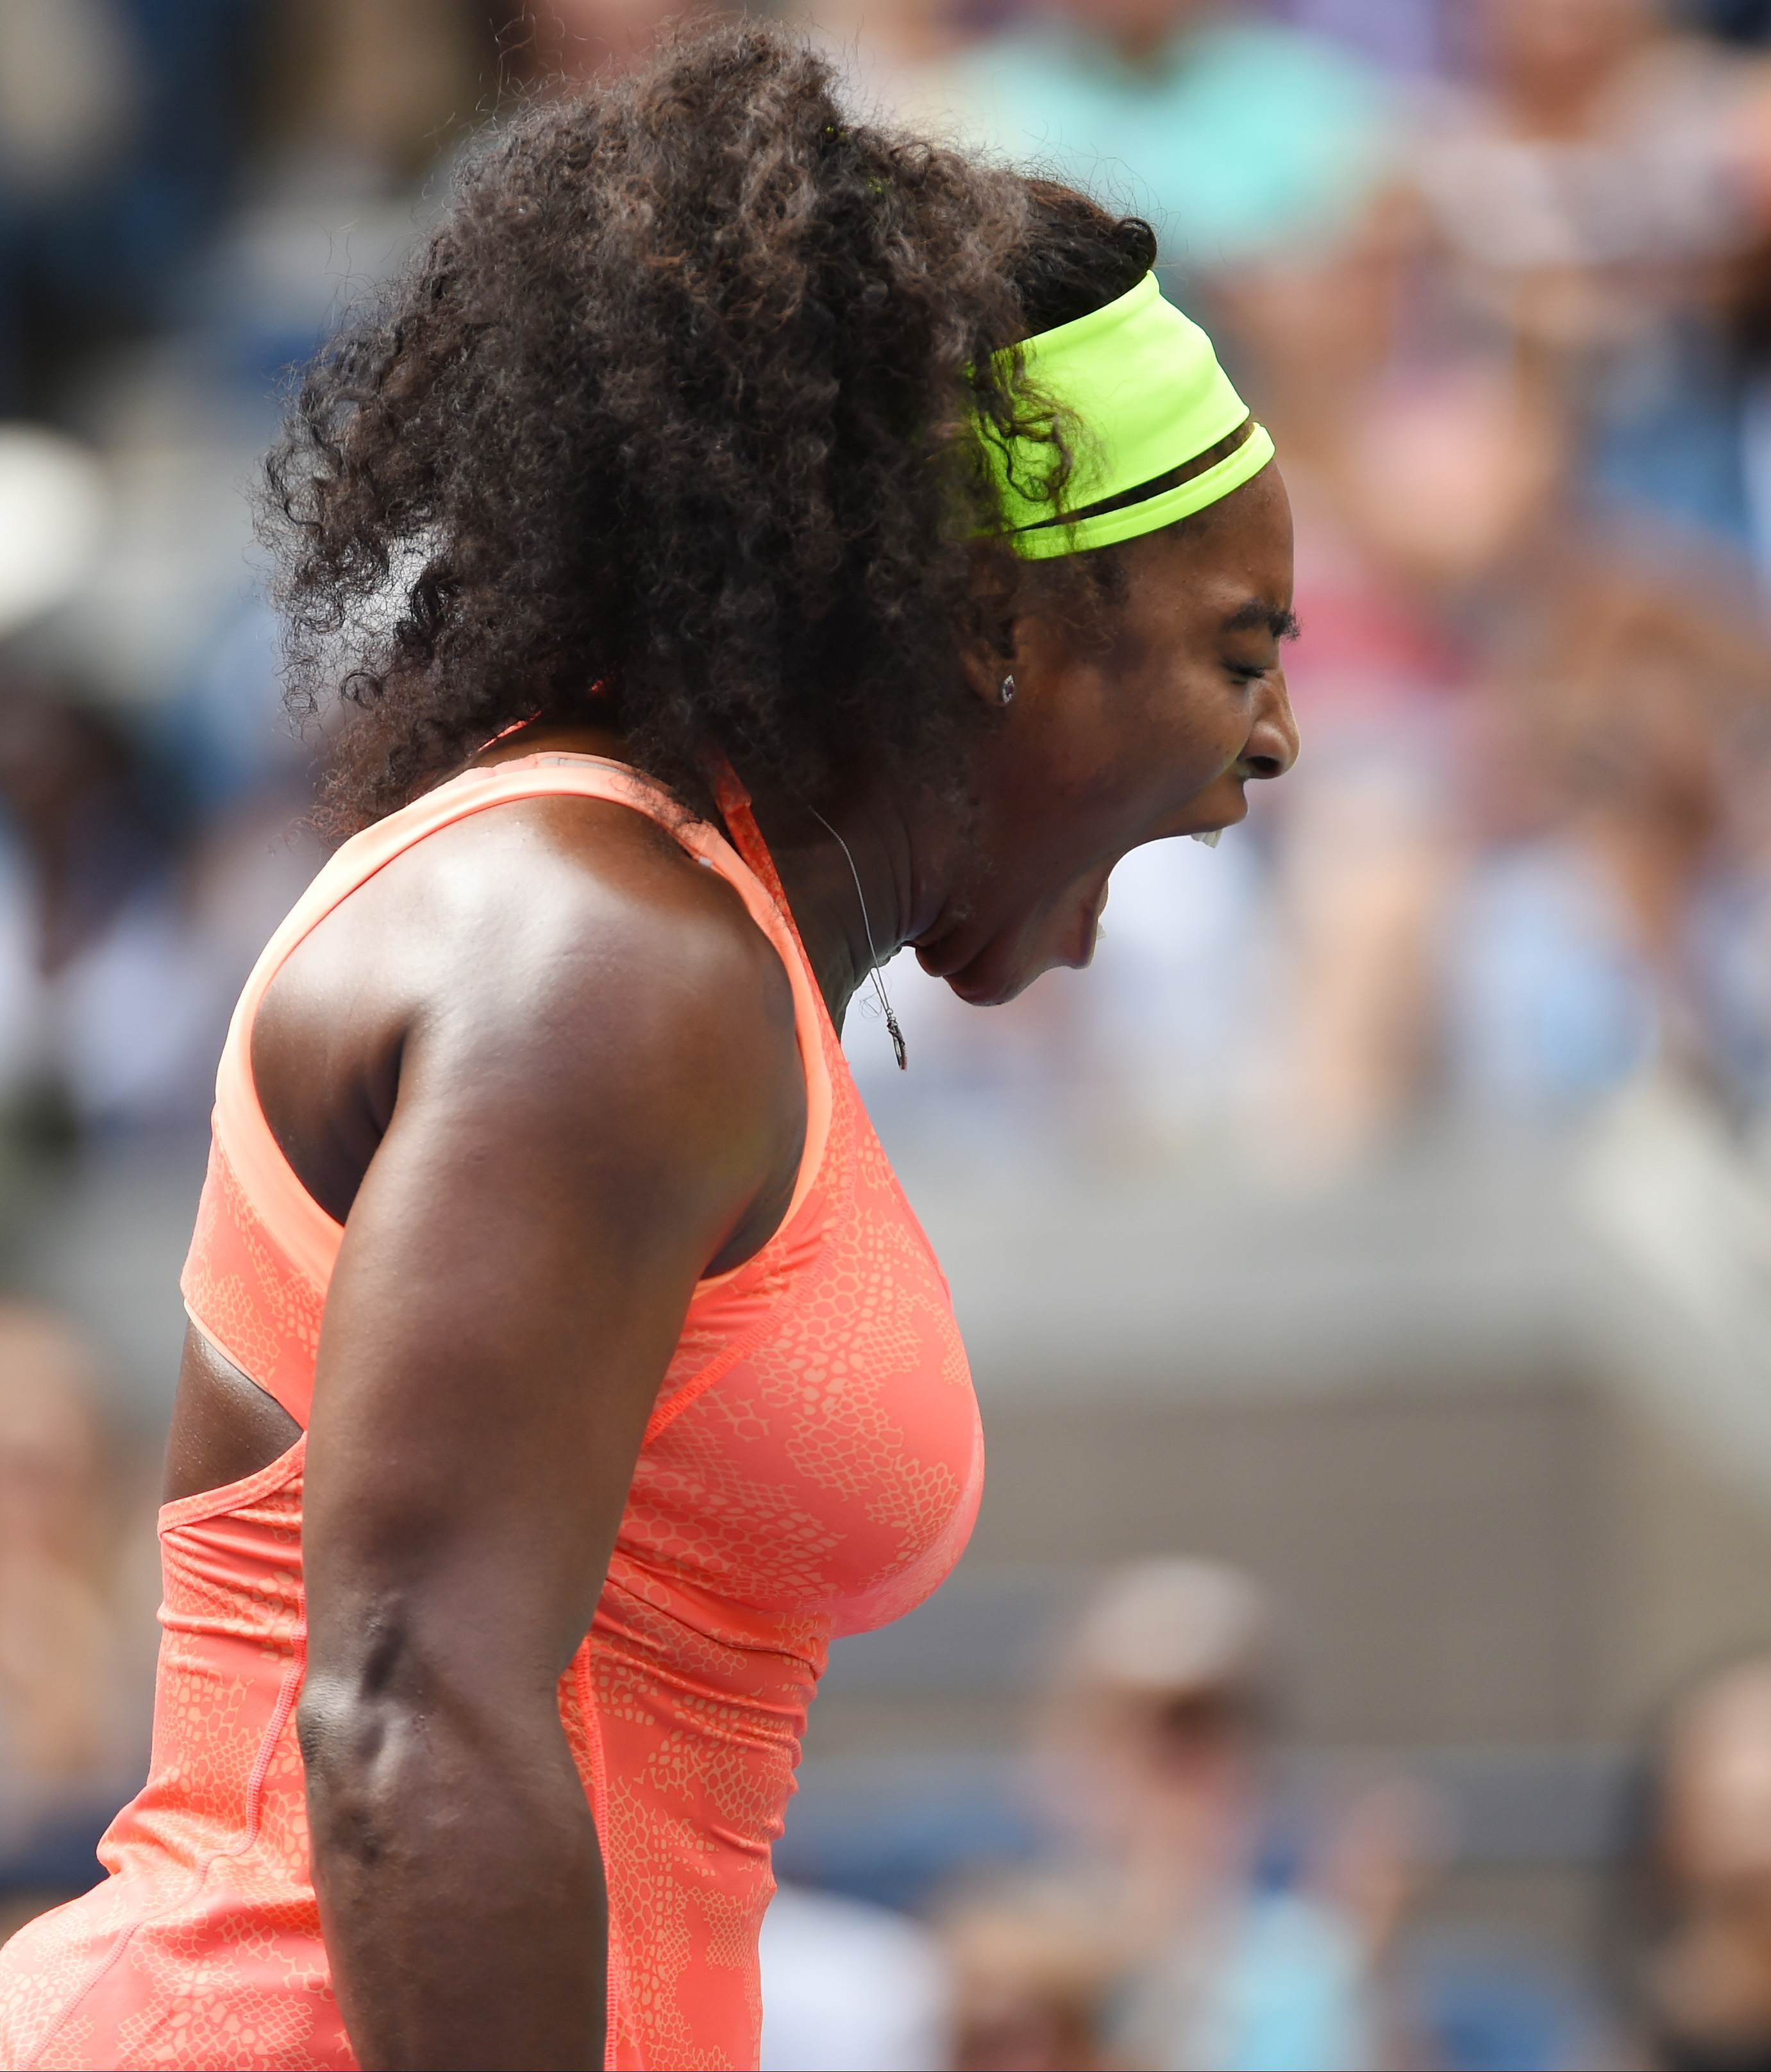 Sep 11, 2015; New York, NY, USA; Serena Williams of the USA reacts after a winner against Roberta Vinci of Italy on day twelve of the 2015 U.S. Open tennis tournament at USTA Billie Jean King National Tennis Center. Mandatory Credit: Robert Deutsch-USA TODAY Sports